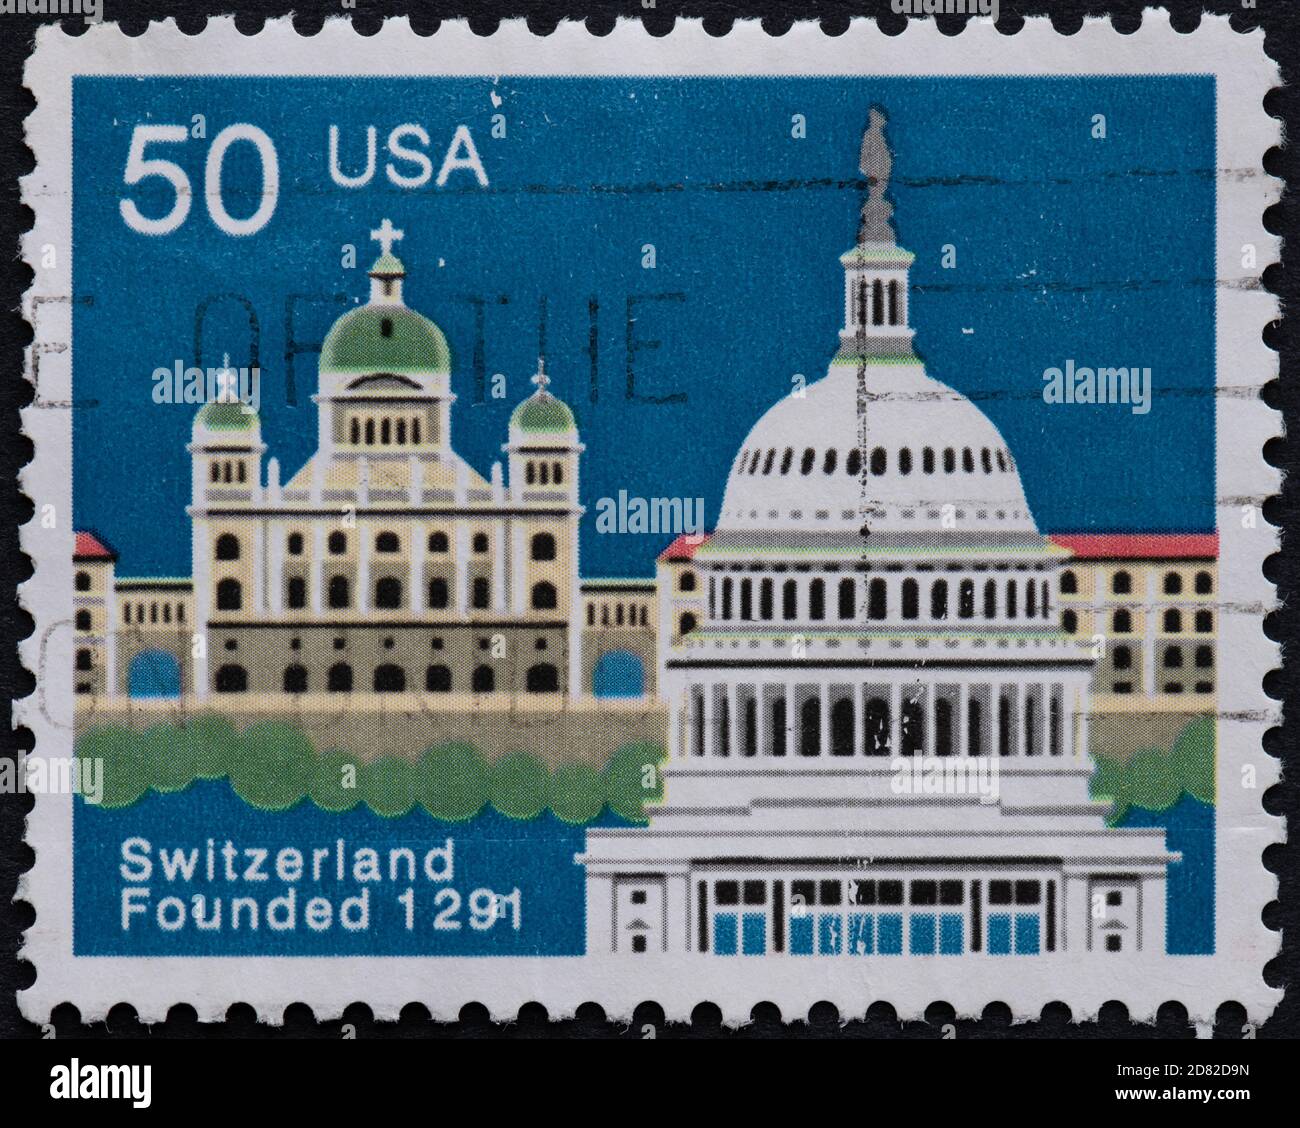 Switzerland 700th anniversary of the oldest operating republic in the world - 50c commemorative stamp issued by the USA in 1991 Stock Photo